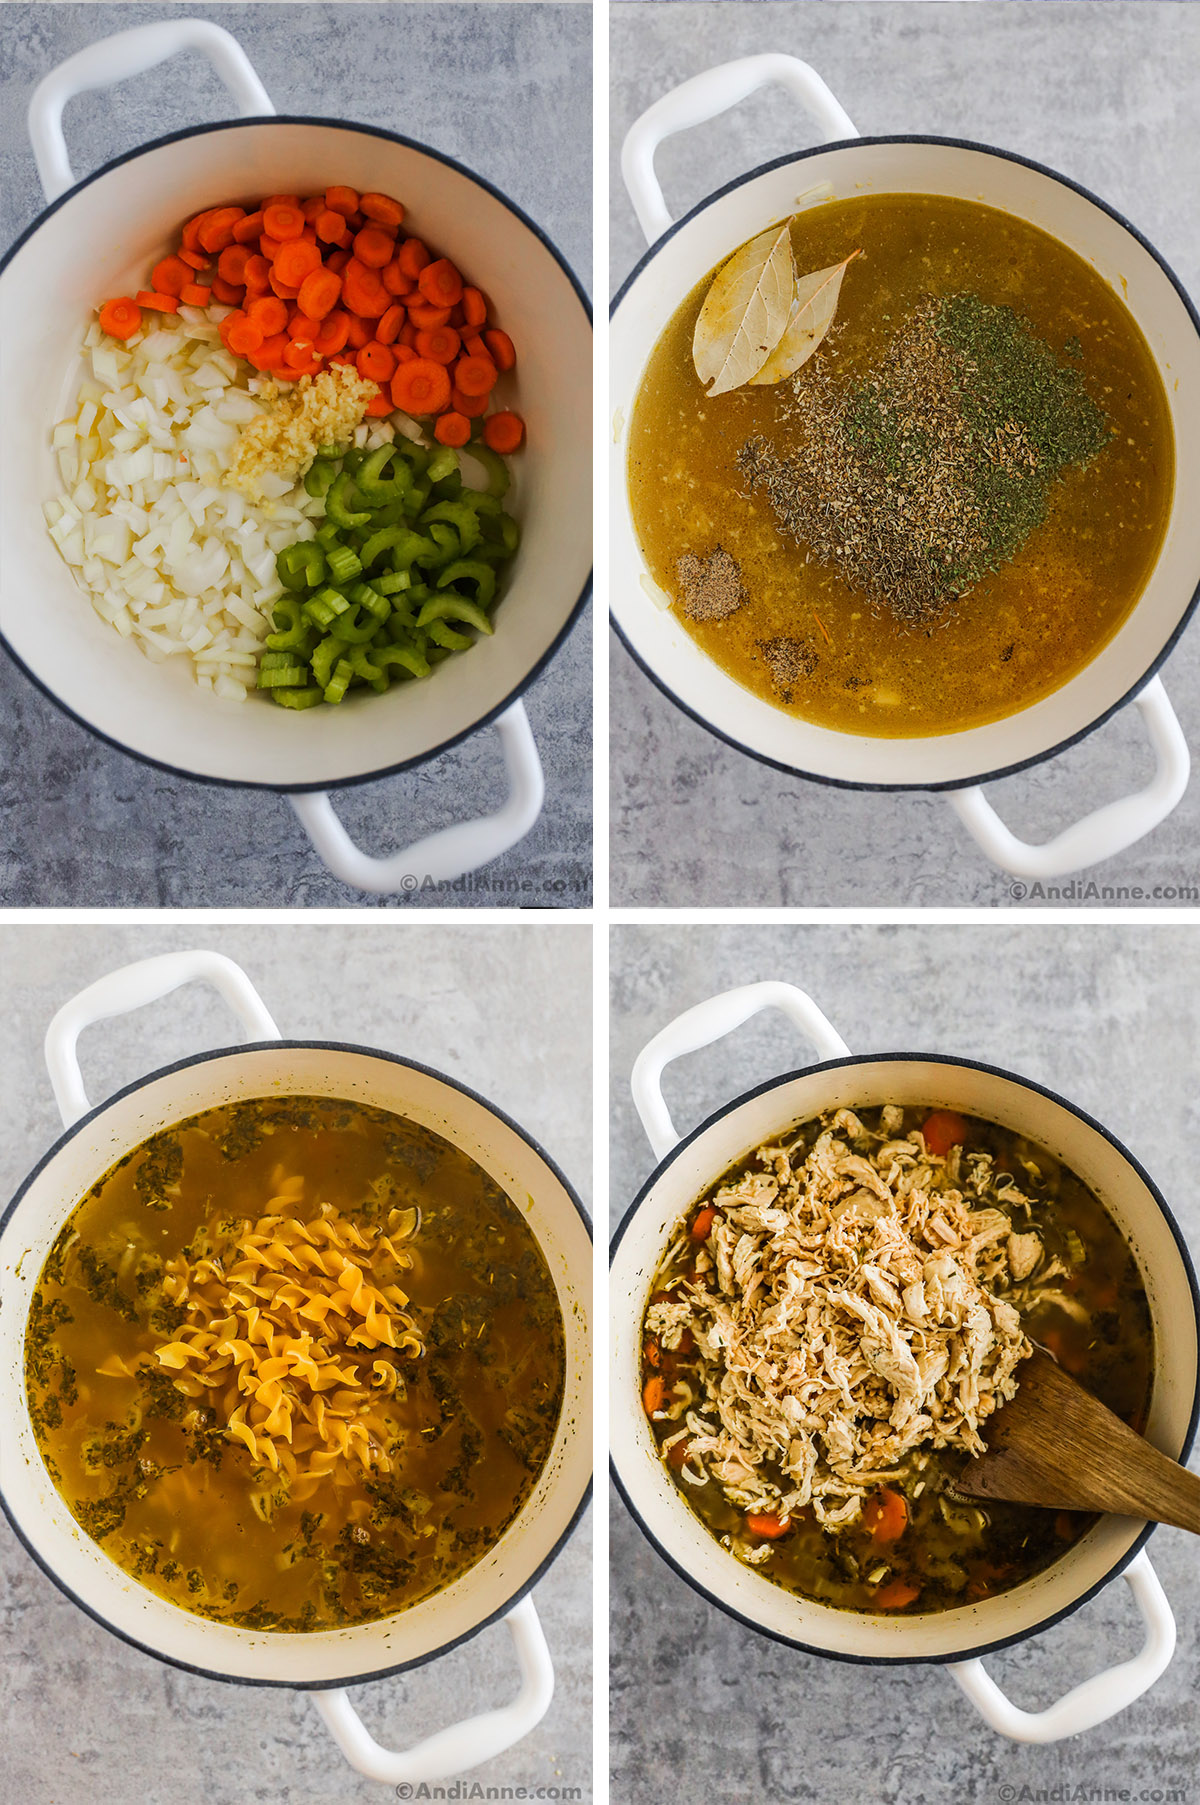 Four images showing steps. First is pot with chopped veggies, second is liquid and spices in pot, third is liquid and uncooked pasta noodles, fourth is shredded chicken dumped into the soup.